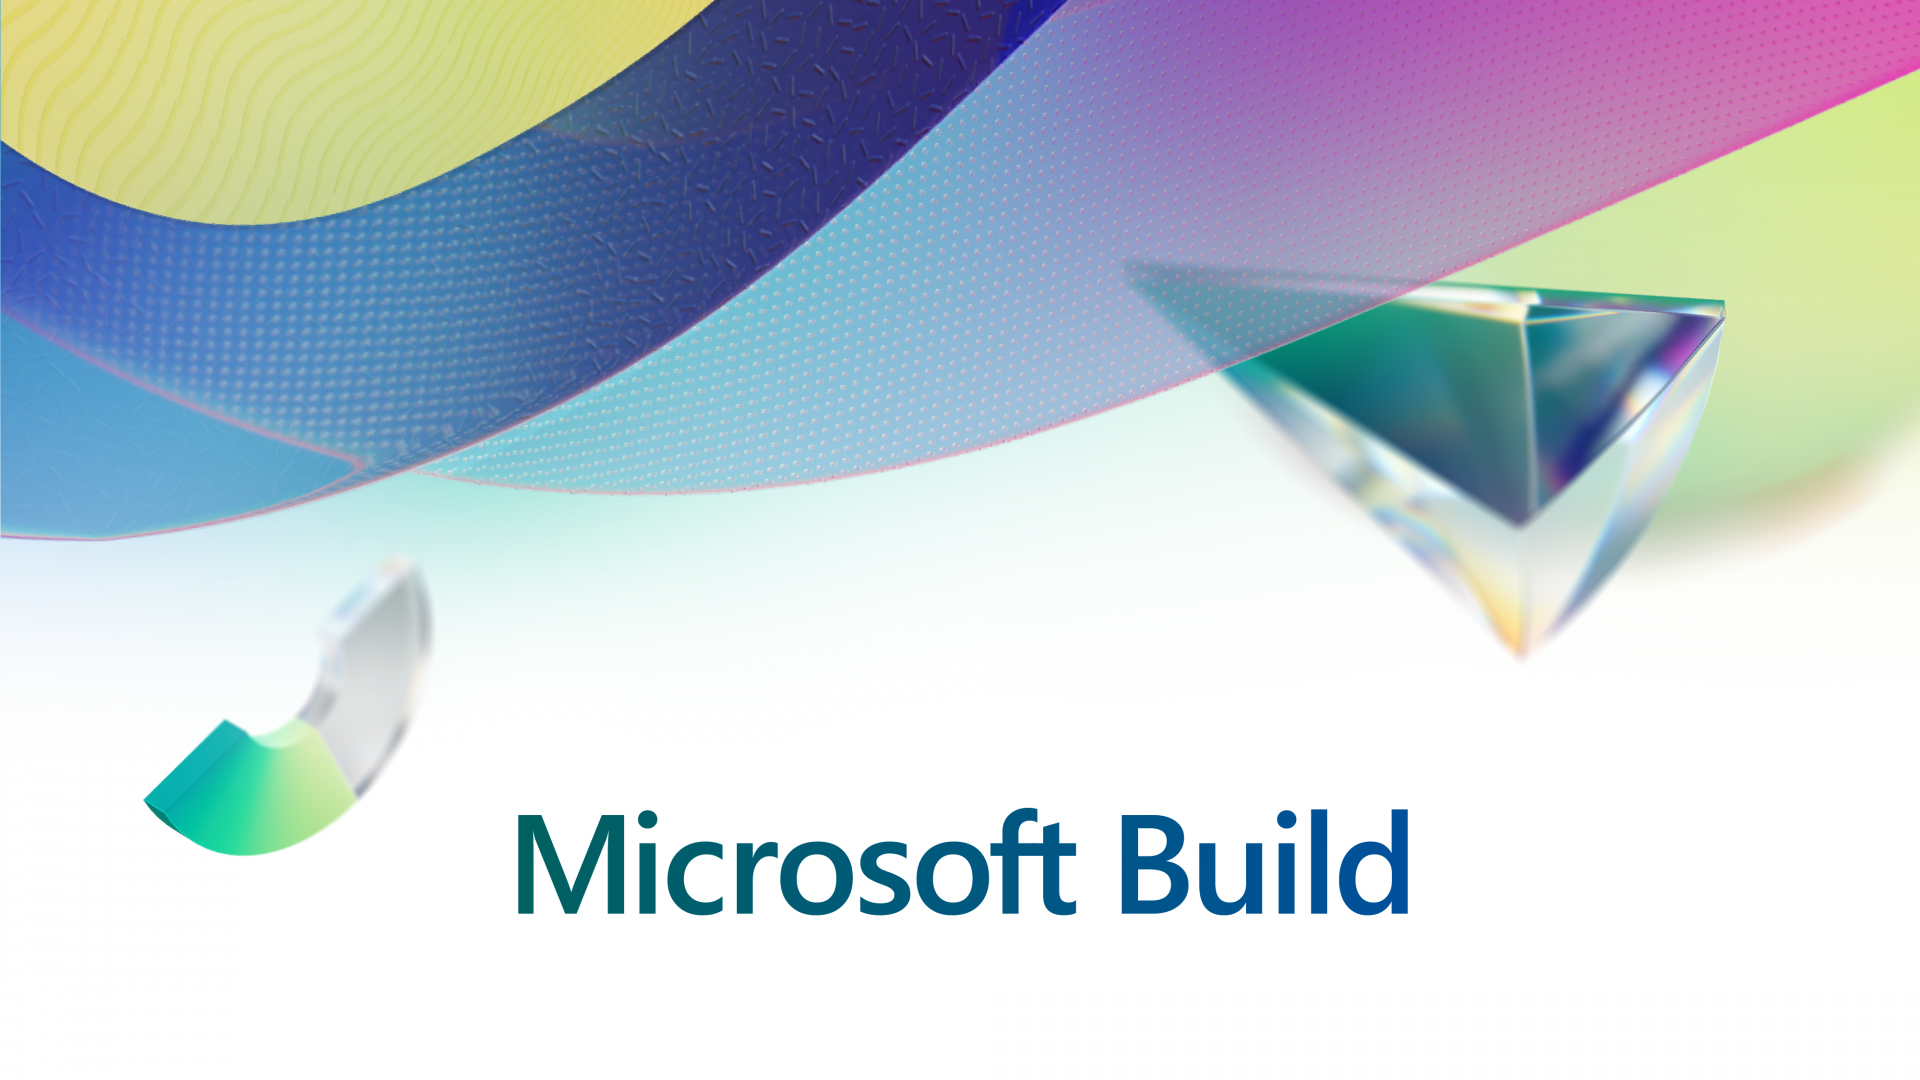 Ribbons of color with Microsoft Build written on the bottom